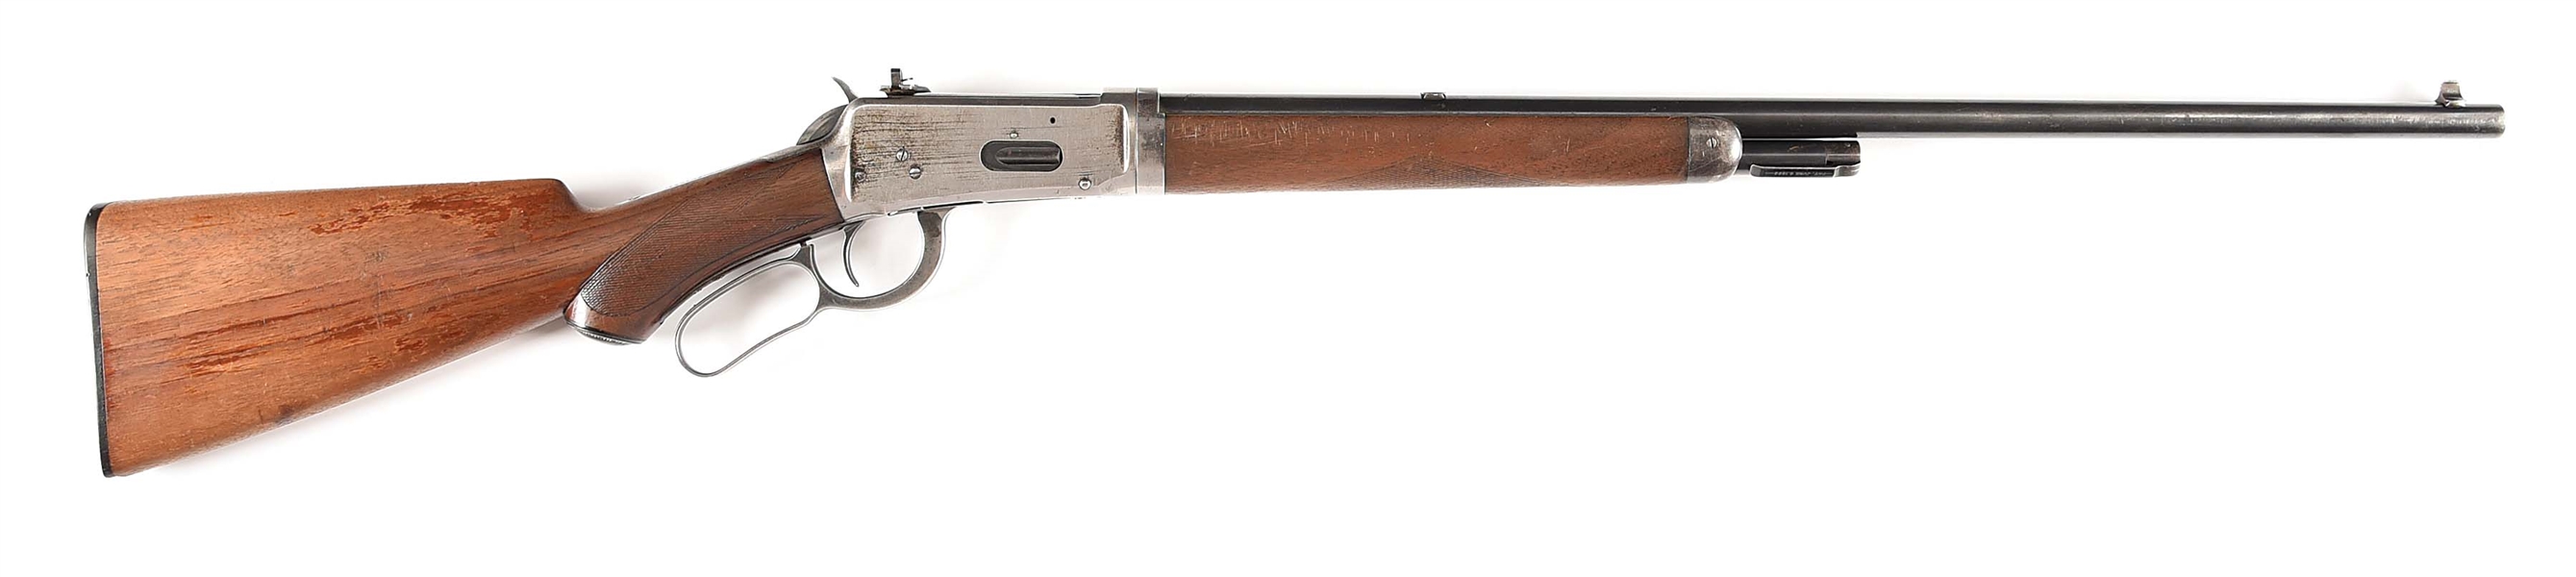 (A) WINCHESTER MODEL 1894 TAKEDOWN LEVER ACTION RIFLE BUILT IN 1894